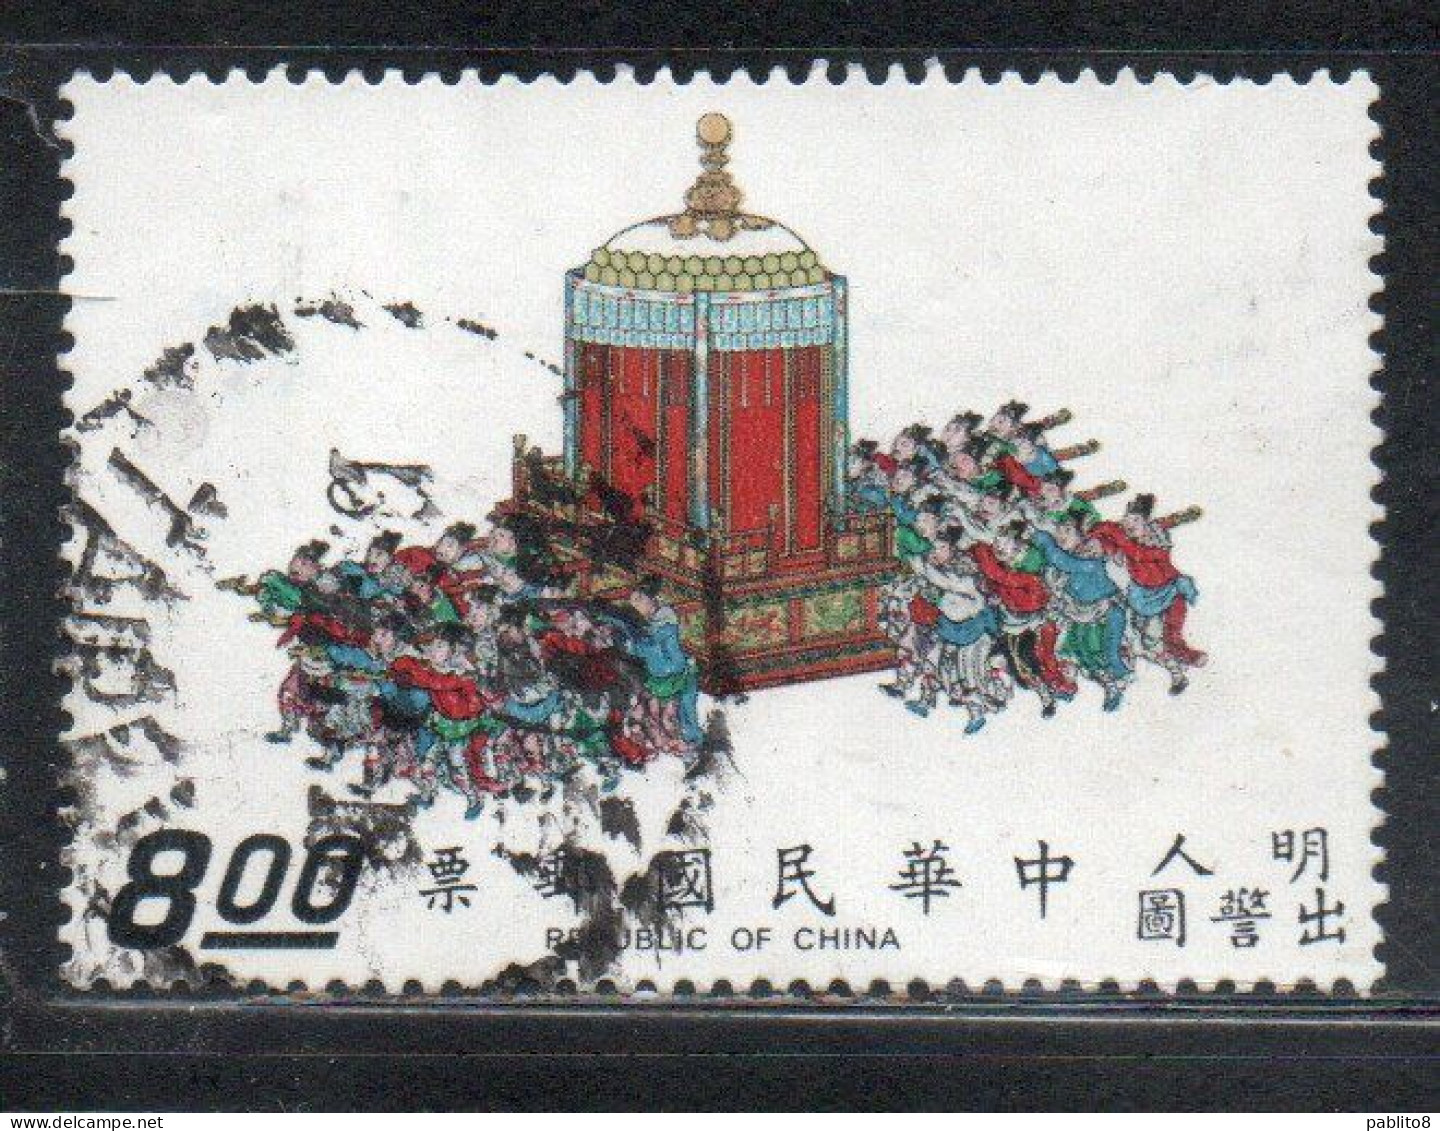 CHINA REPUBLIC CINA TAIWAN FORMOSA 1972 SCROLLS DEPICTING EMPEROR SHIH-TSUNG'S SEDAN CHAIR CARRIED BY 28 ME8$ USED USATO - Oblitérés